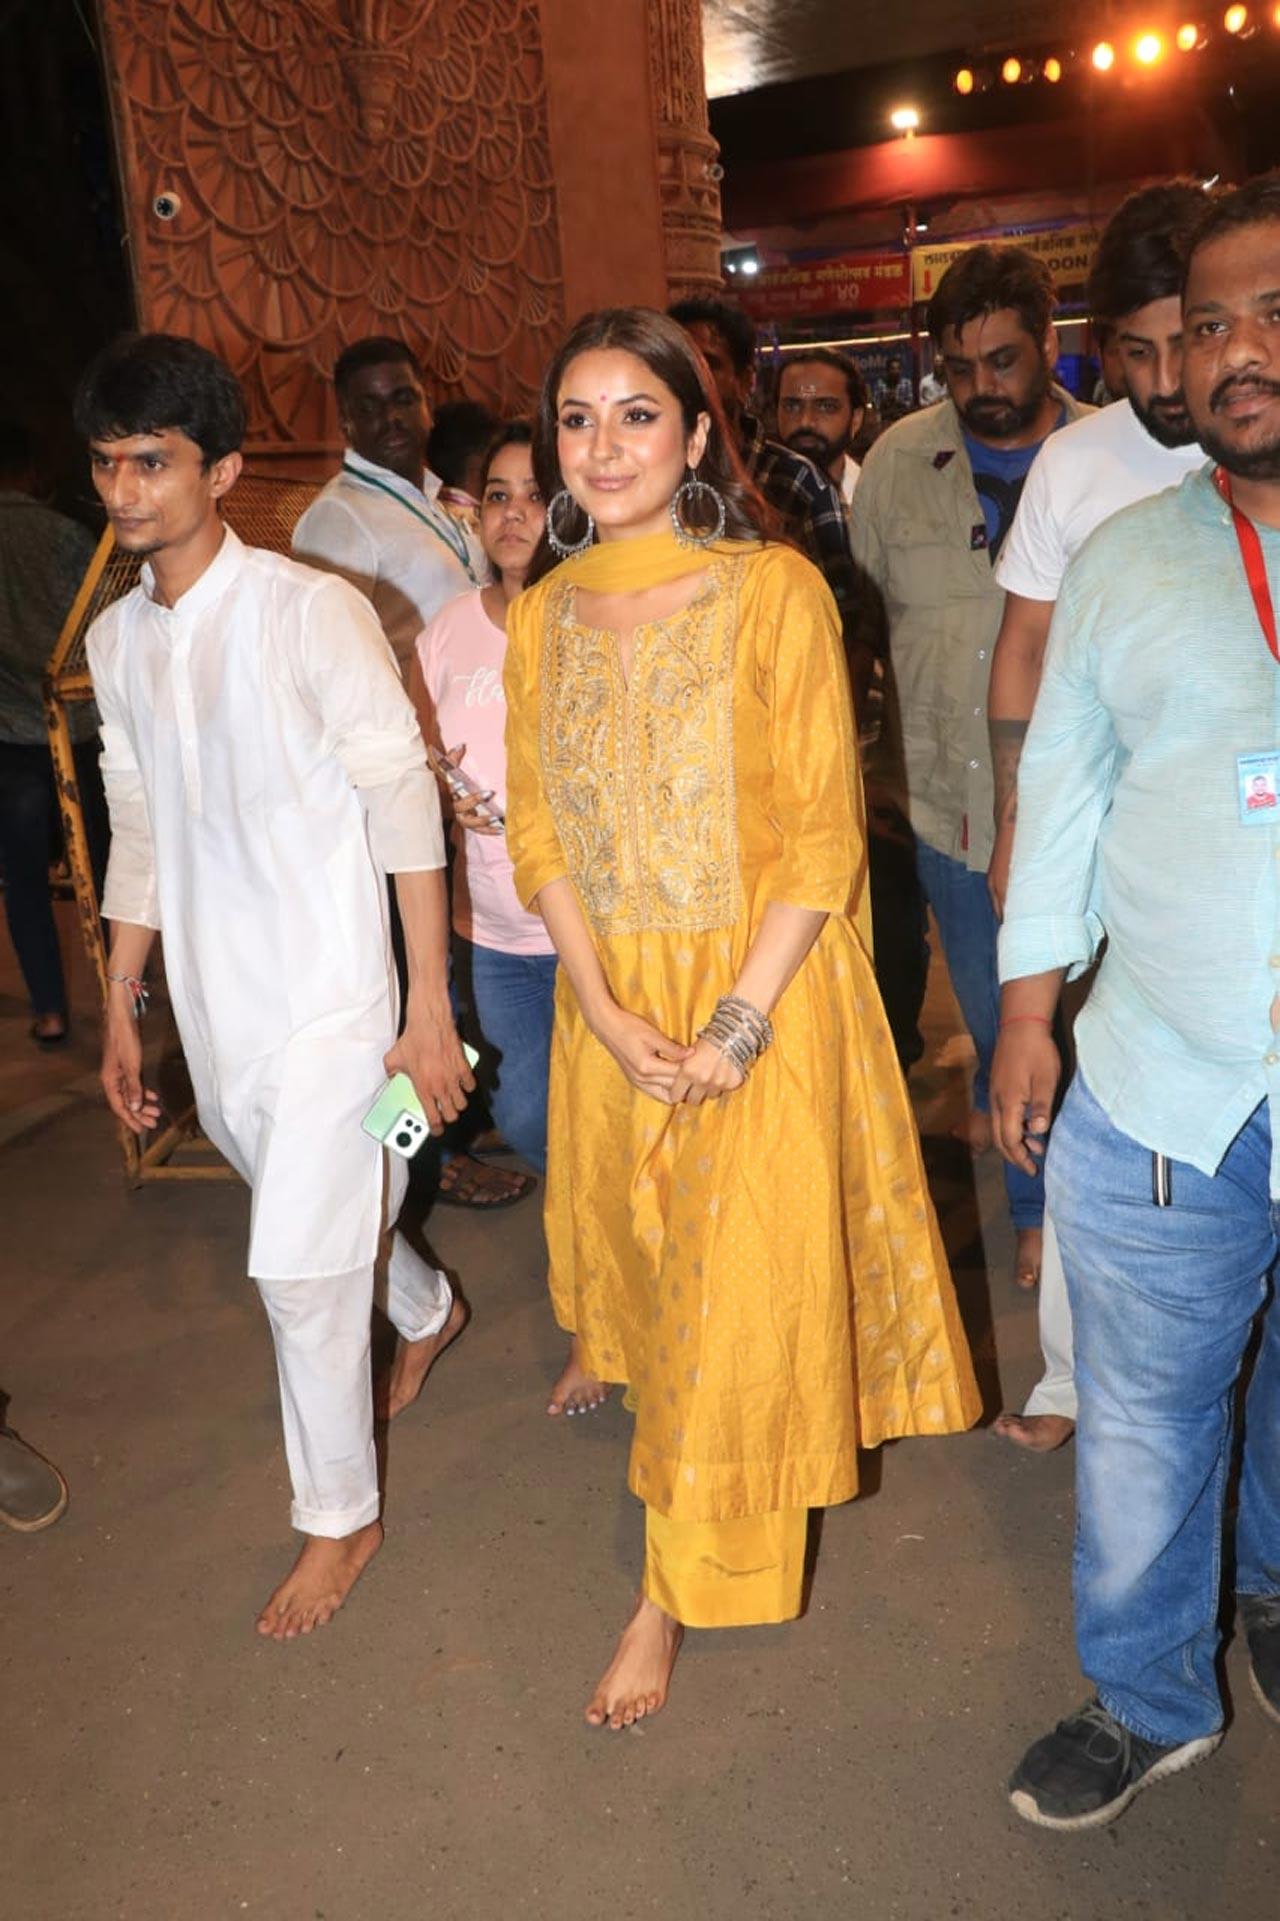 Shehnaaz Gill was clicked with her brother Shehbaz at Lalbaugcha Raja, seeking blessings from Lord Ganesha